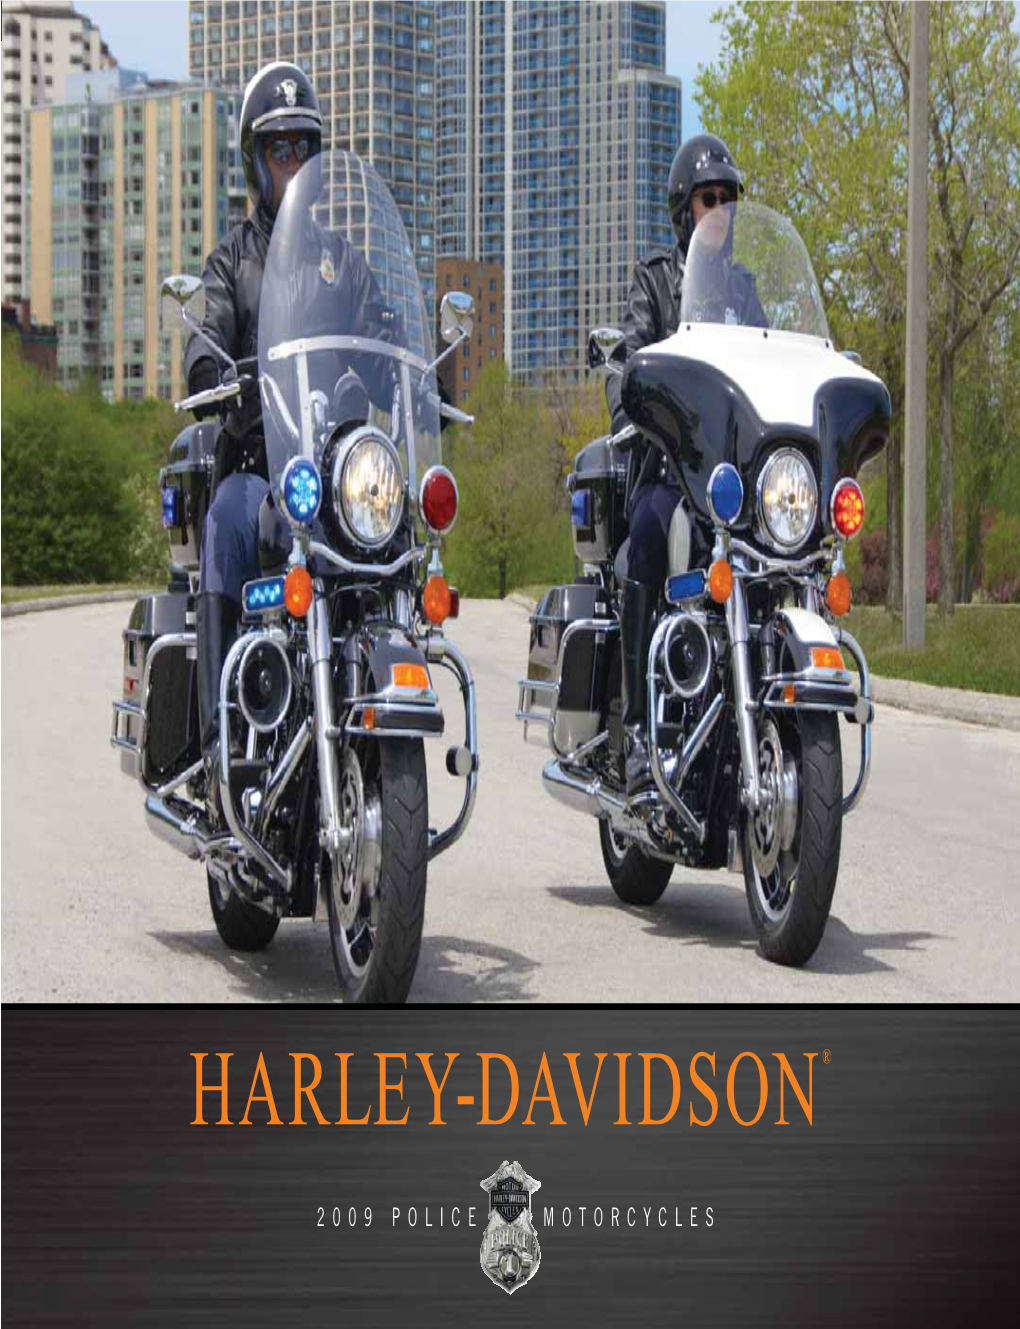 2009 Harley-Davidson Fire, Rescue, Police and Peace